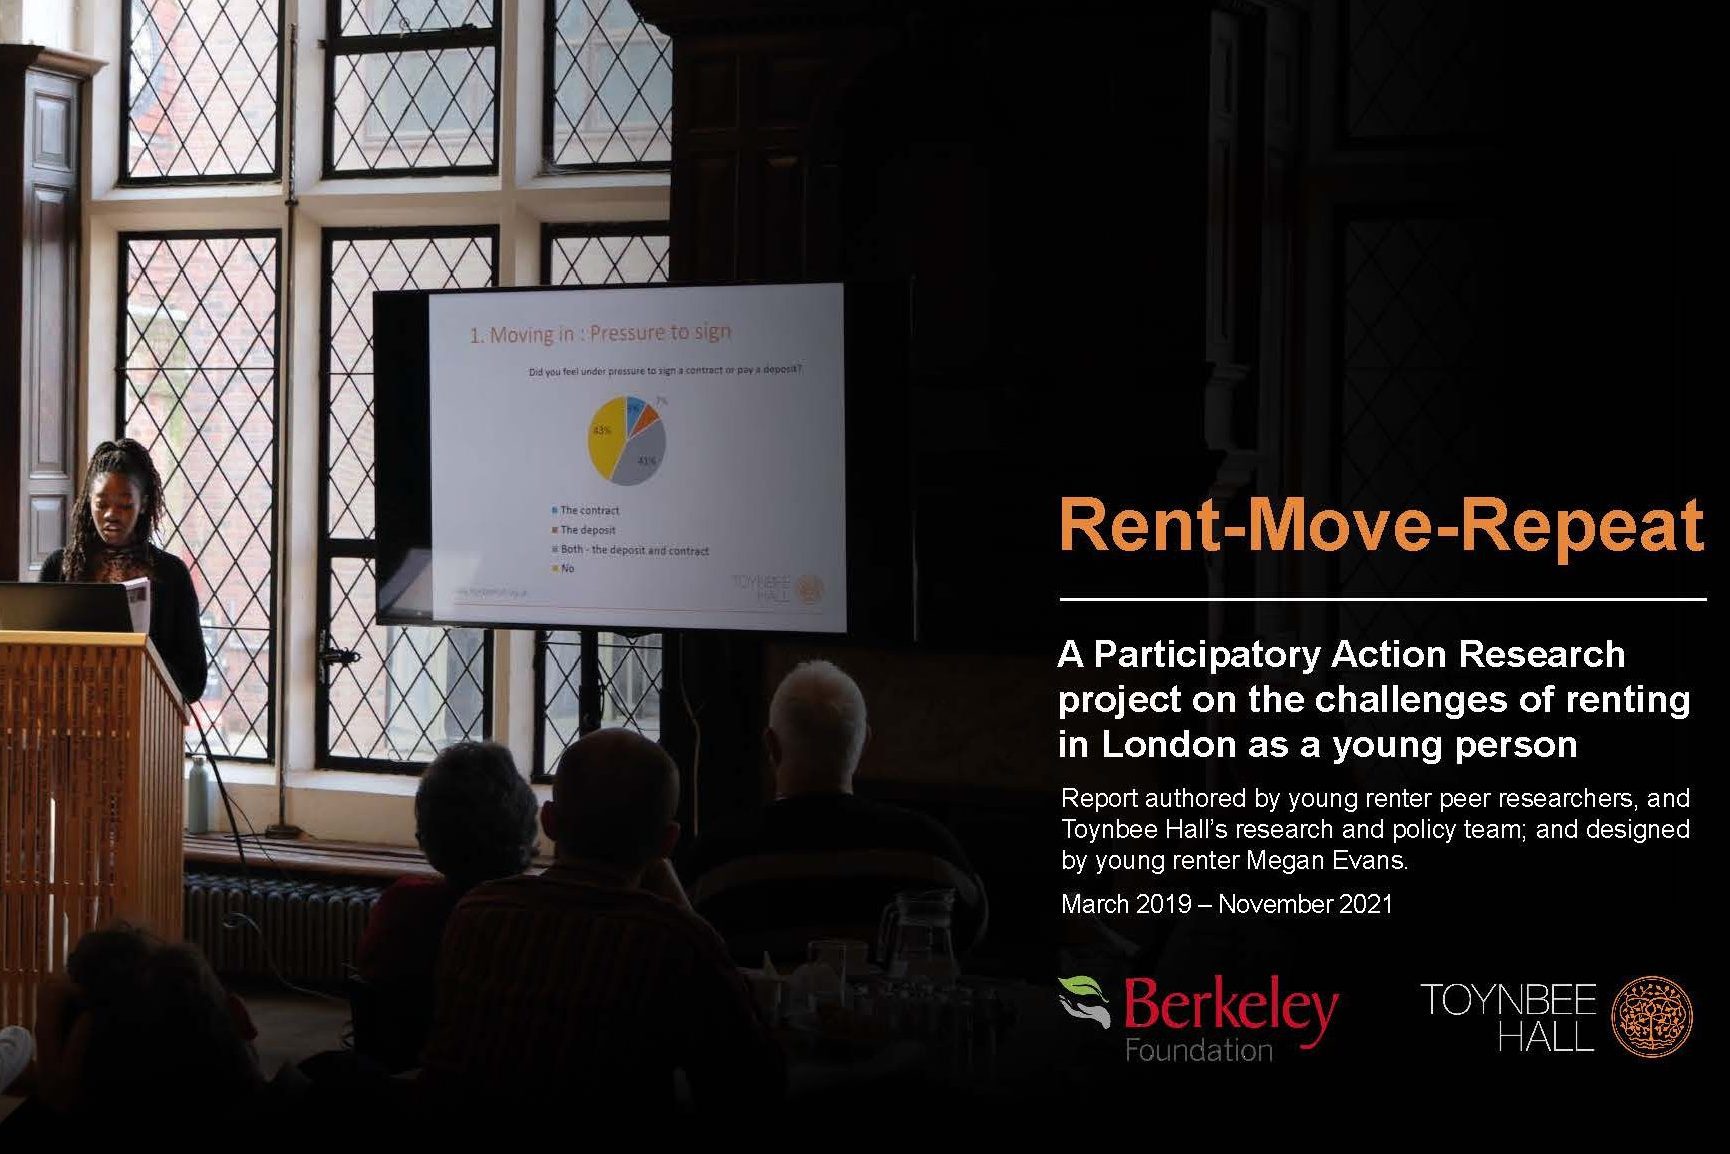 Rent-Move-Repeat young renters report